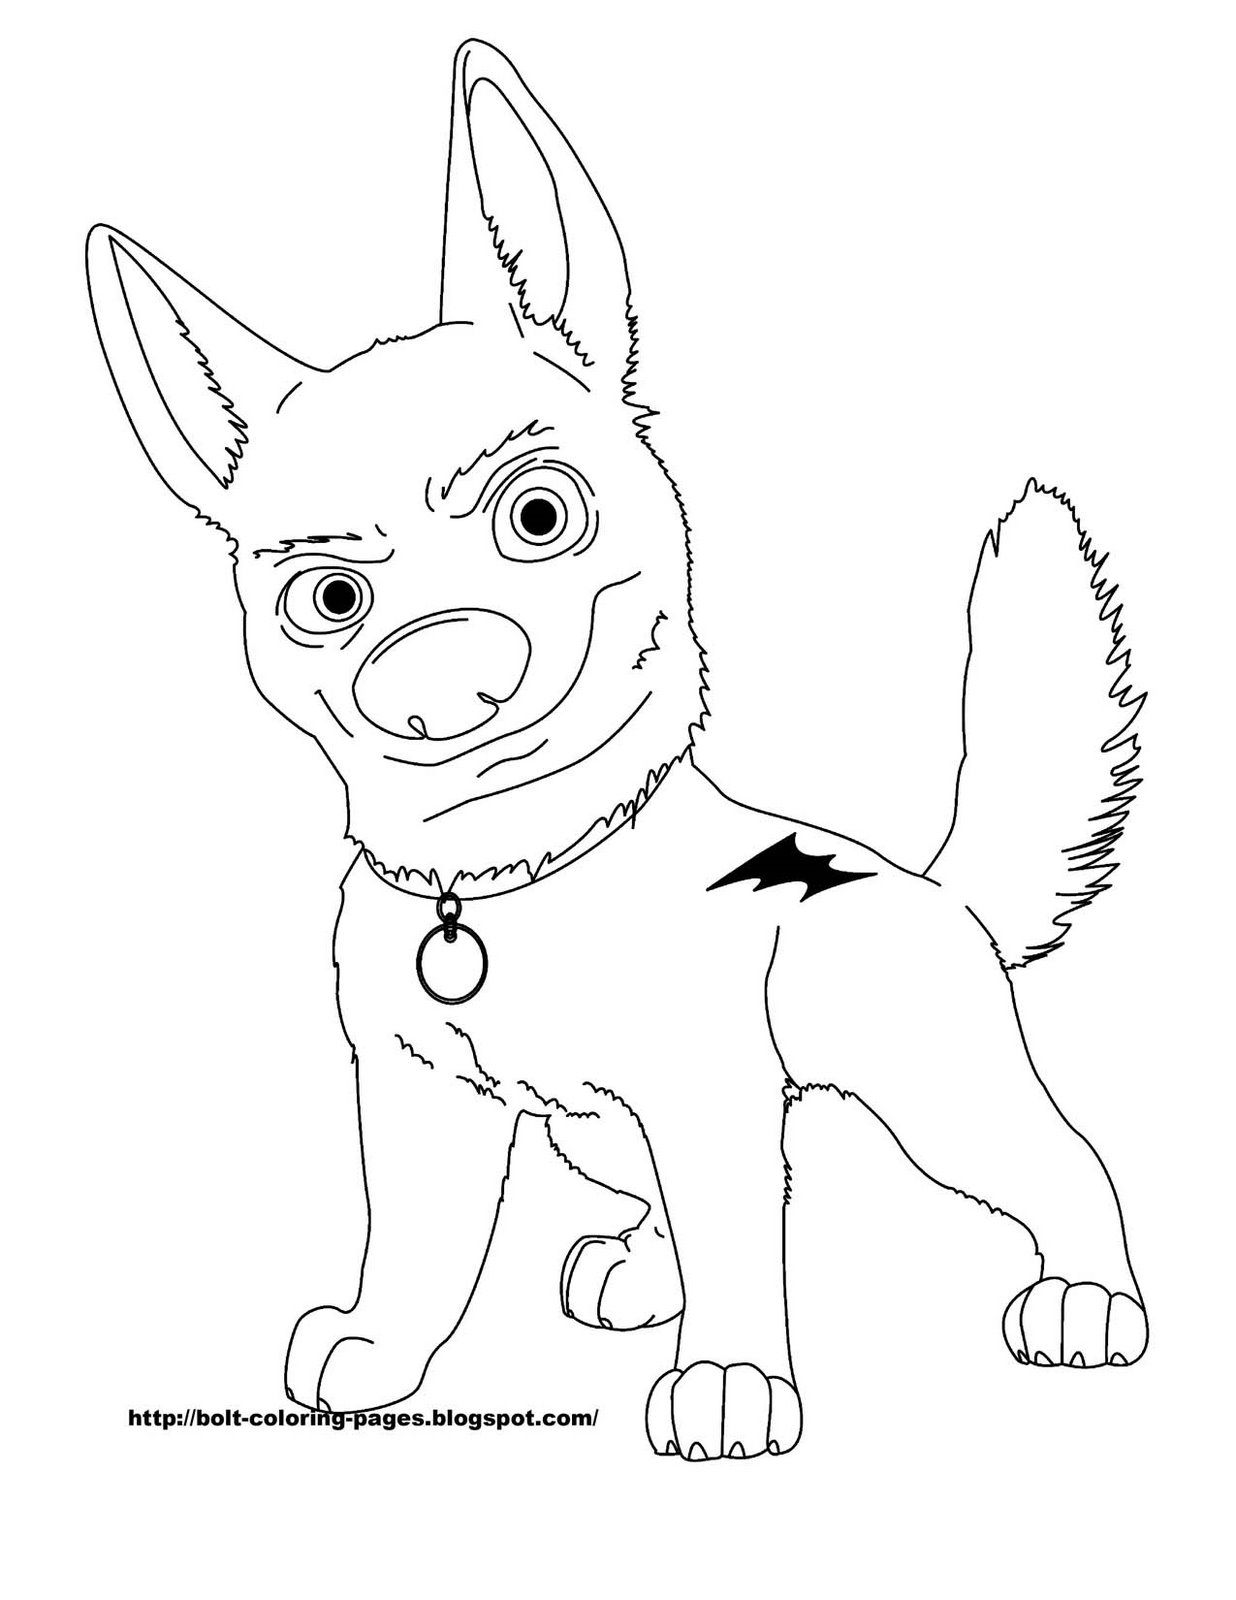 [bolt-coloring-pages-022.jpg]